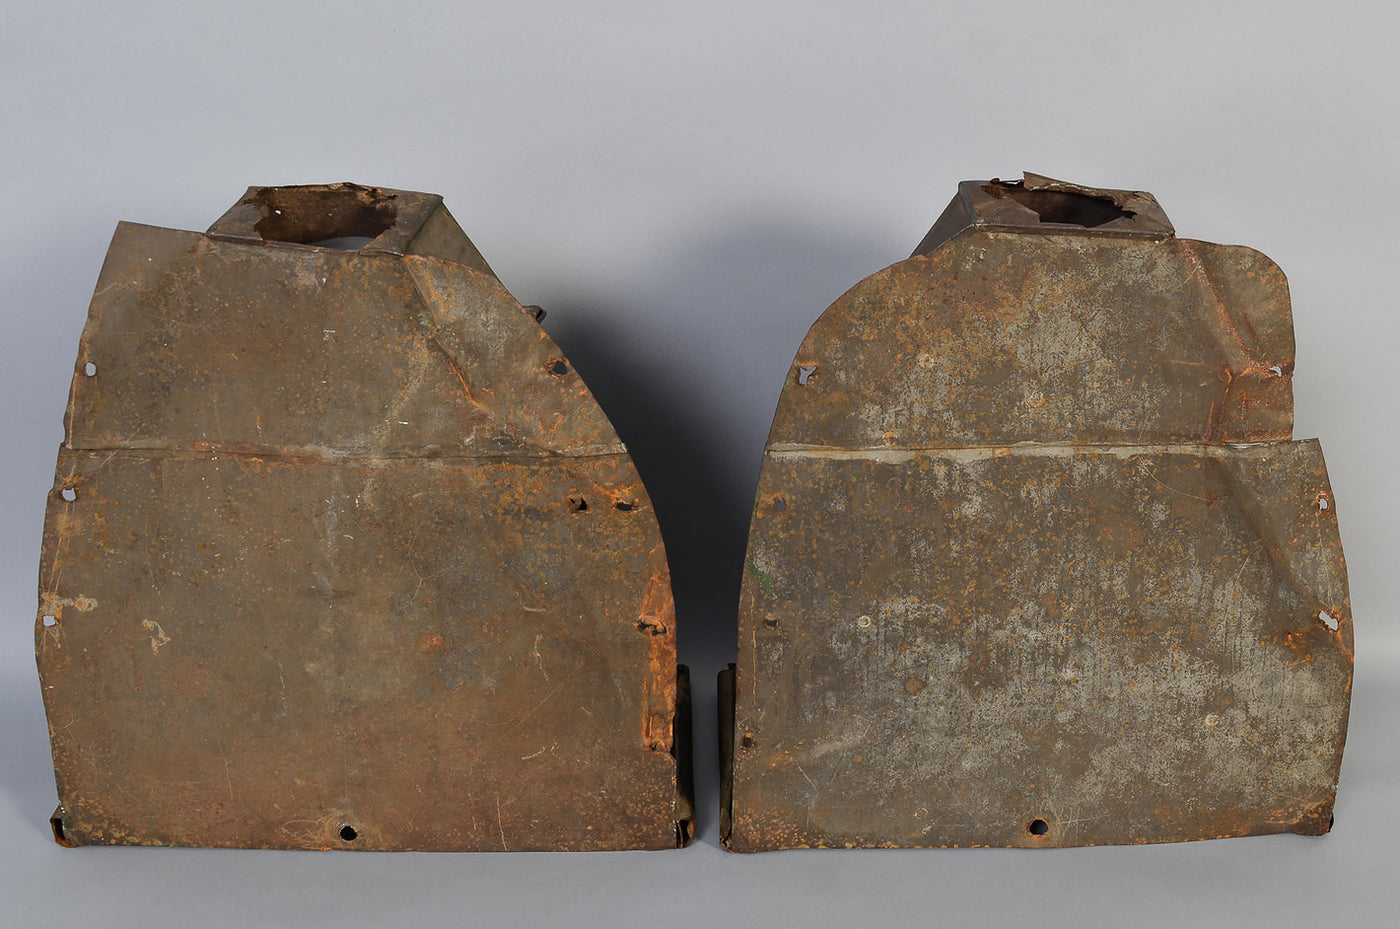 Pair of Metal Downspouts Dated 1847: New York